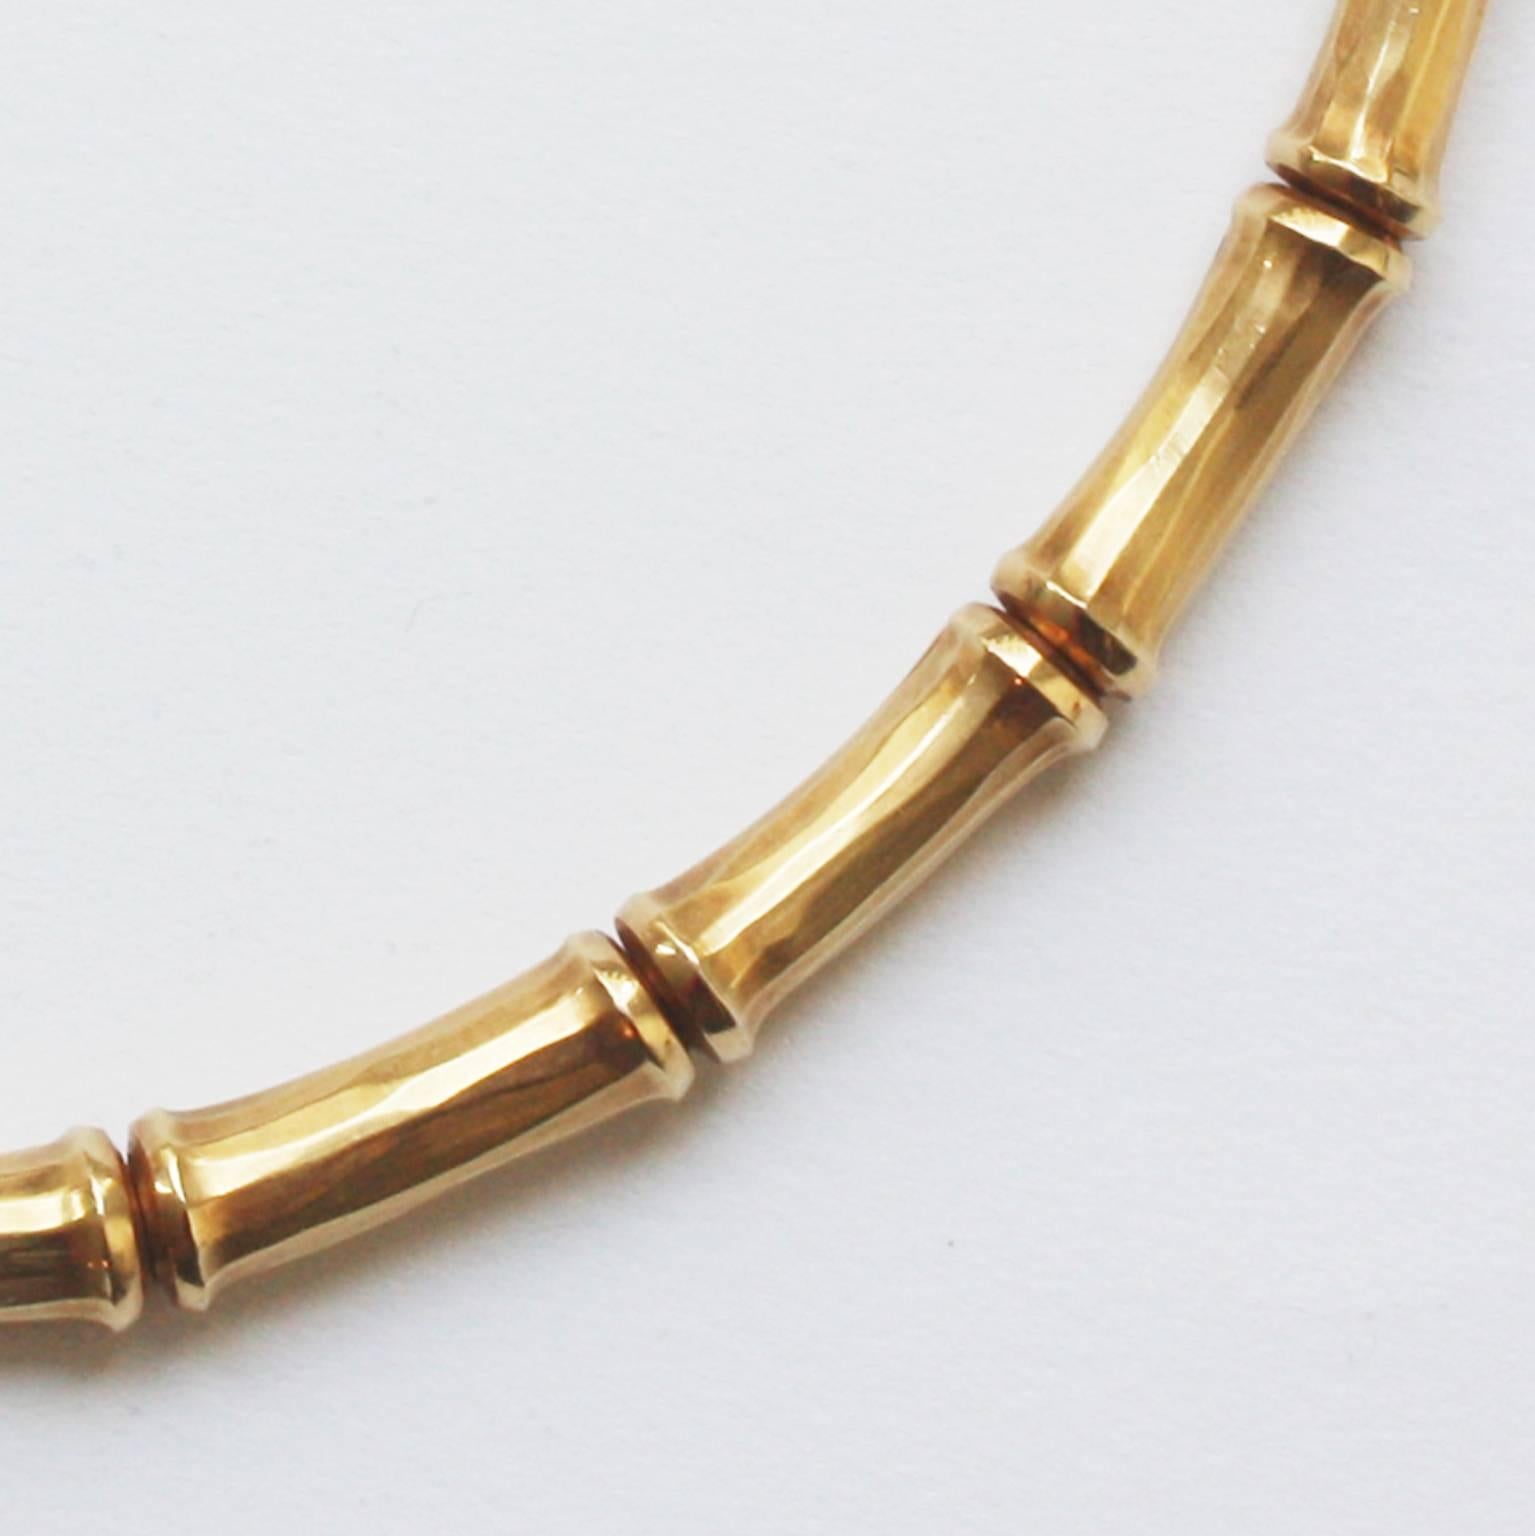 Classic 18-carat gold bamboo necklace, signed and numbered: Cartier, 847558.

weight: 82.5 grams
length: 37 cm